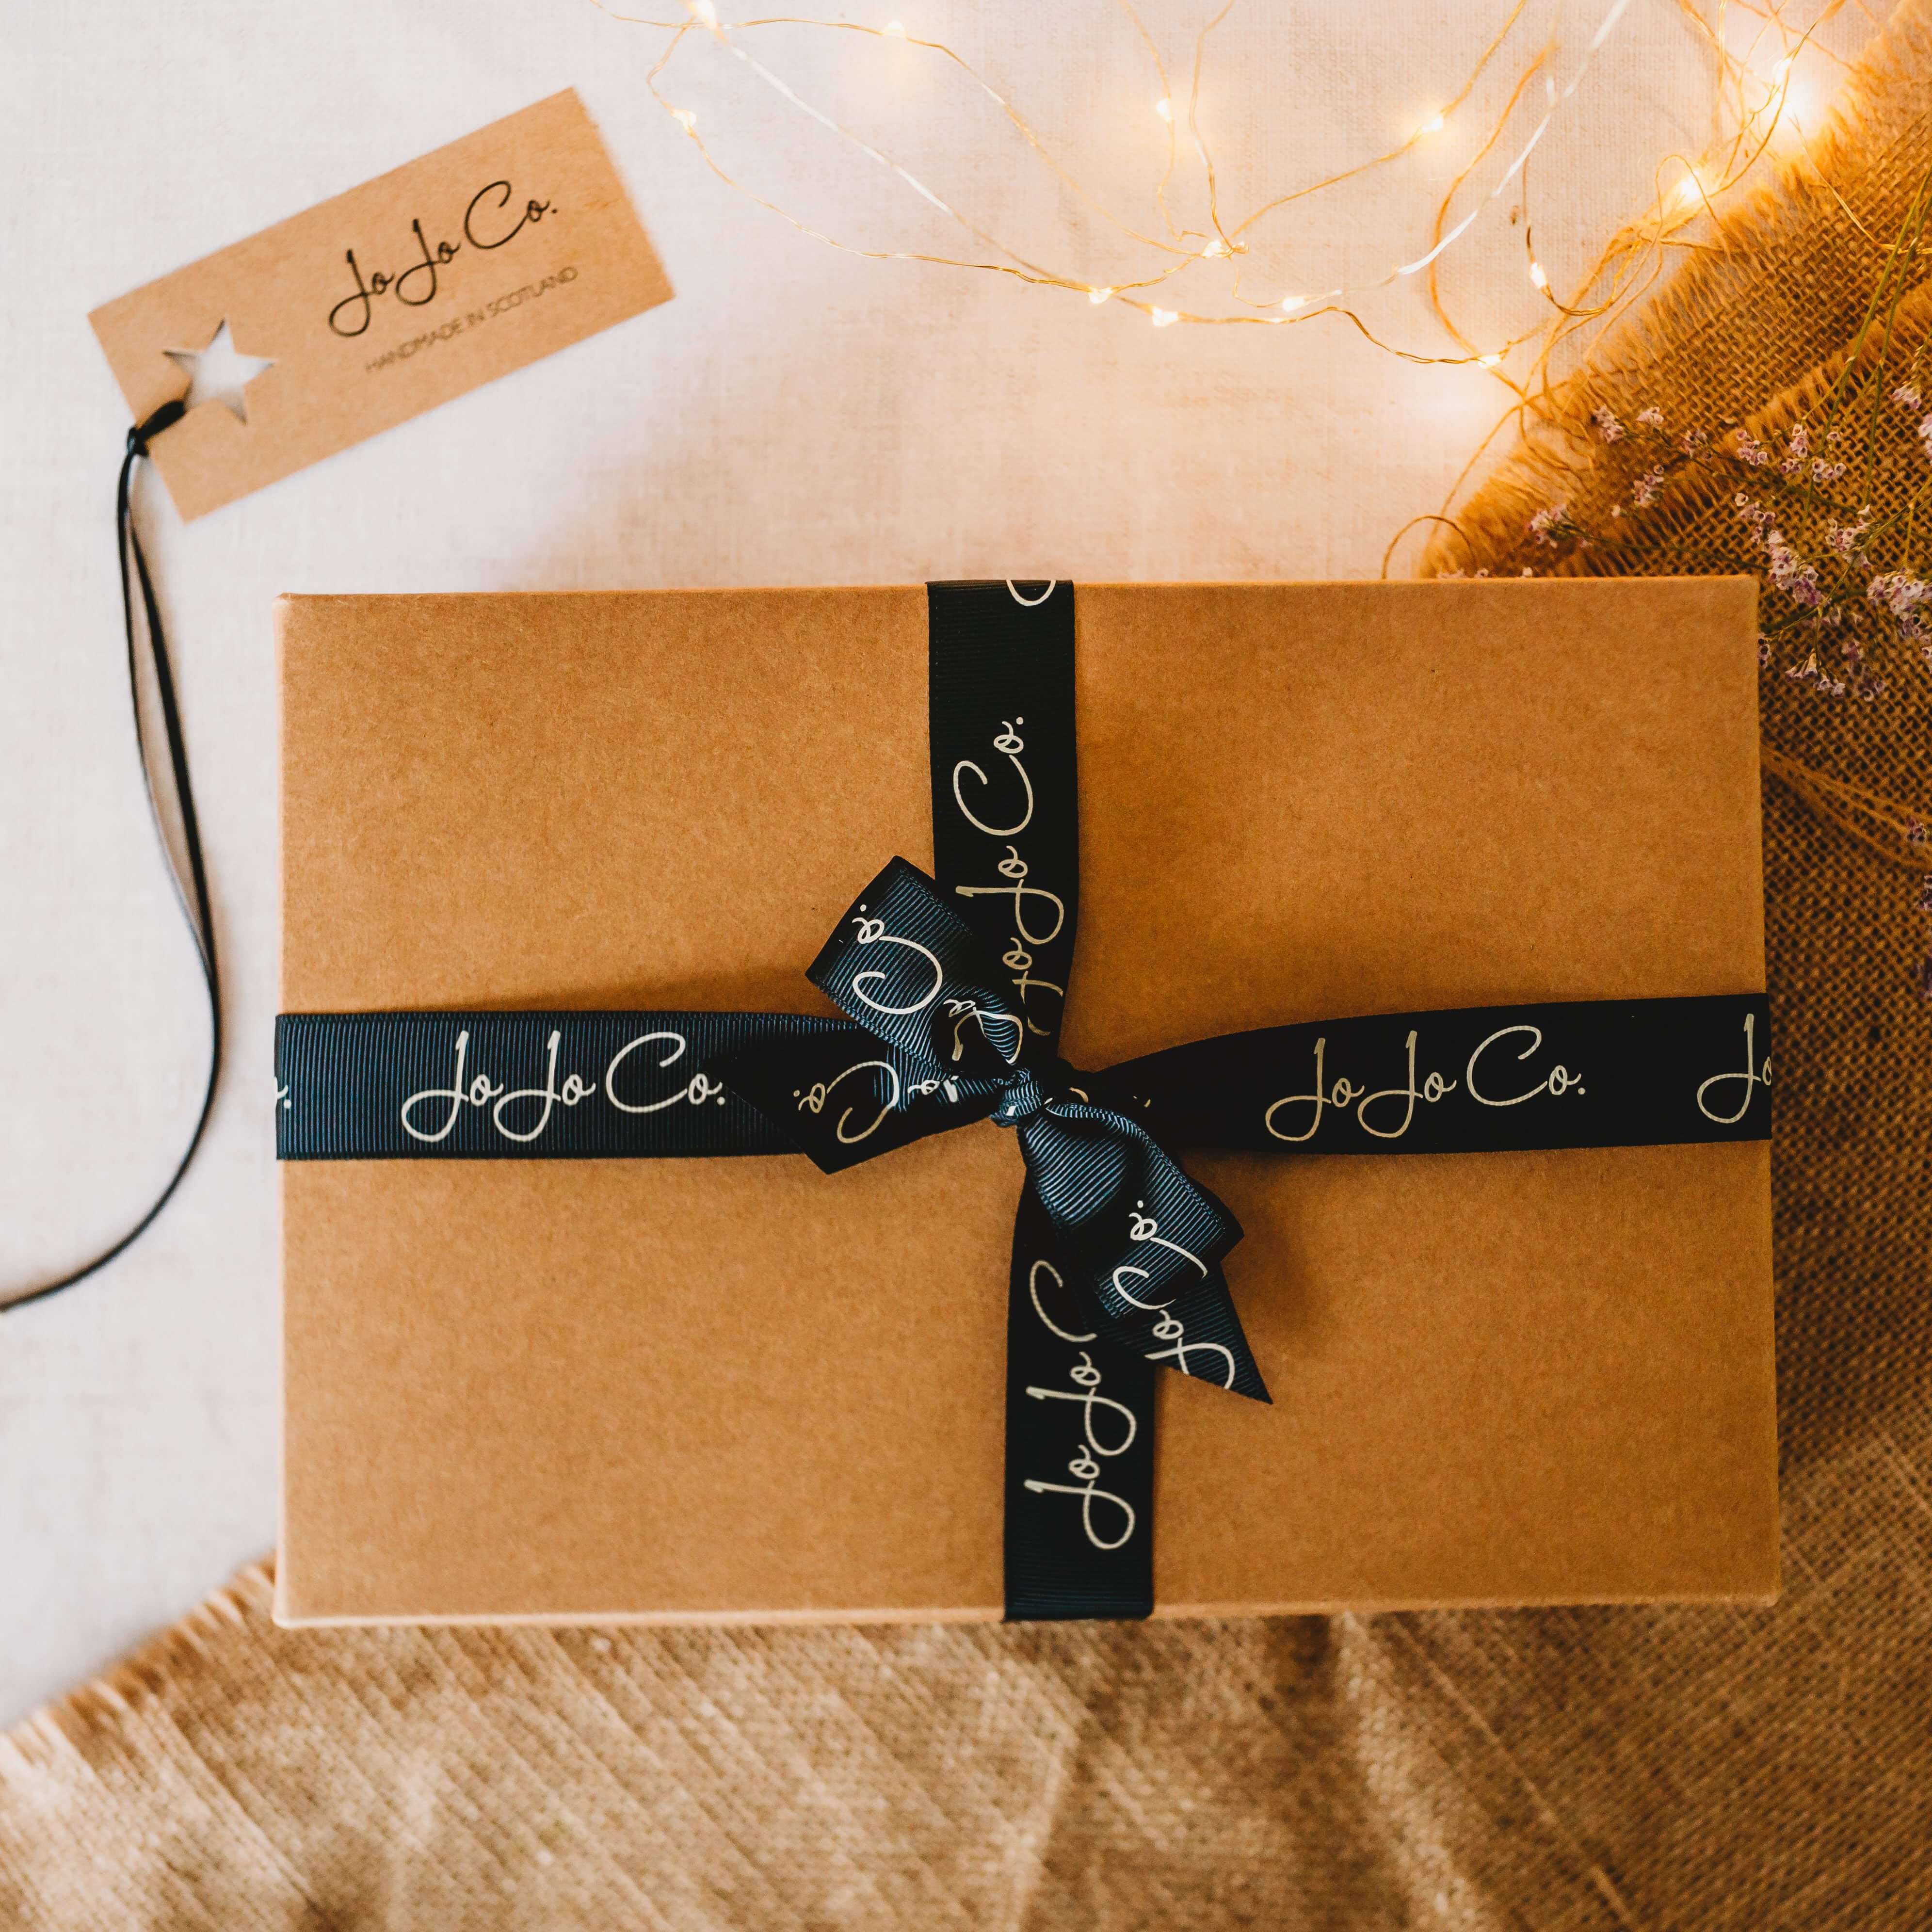 A cardboard gift box tied with black JoJo Co. bow sits on top of jute fabric, with fairy lights  and gift tag in the image.